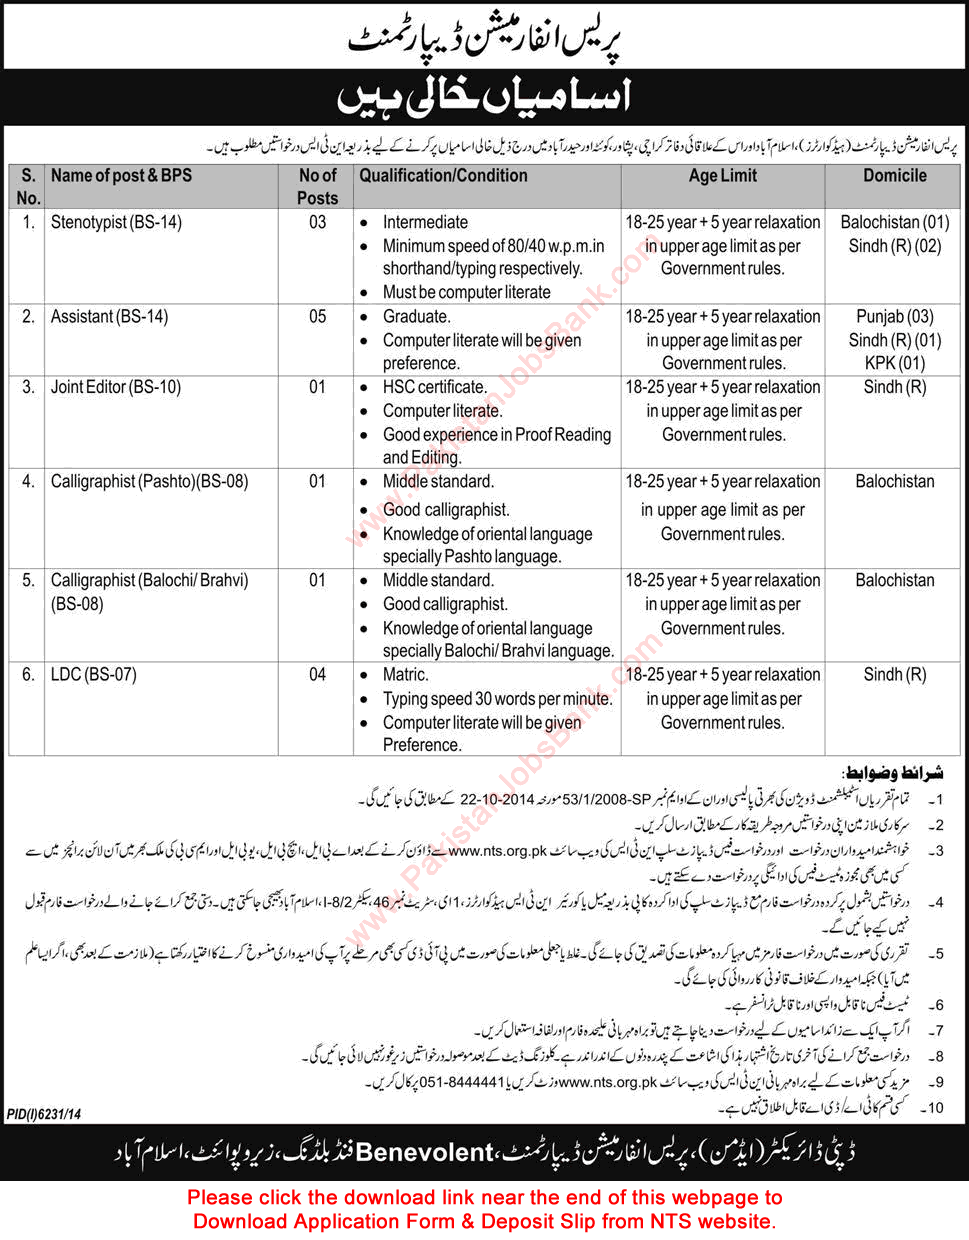 Jobs Vacant in Press Information Department Pakistan 2015 May NTS Application Form Download